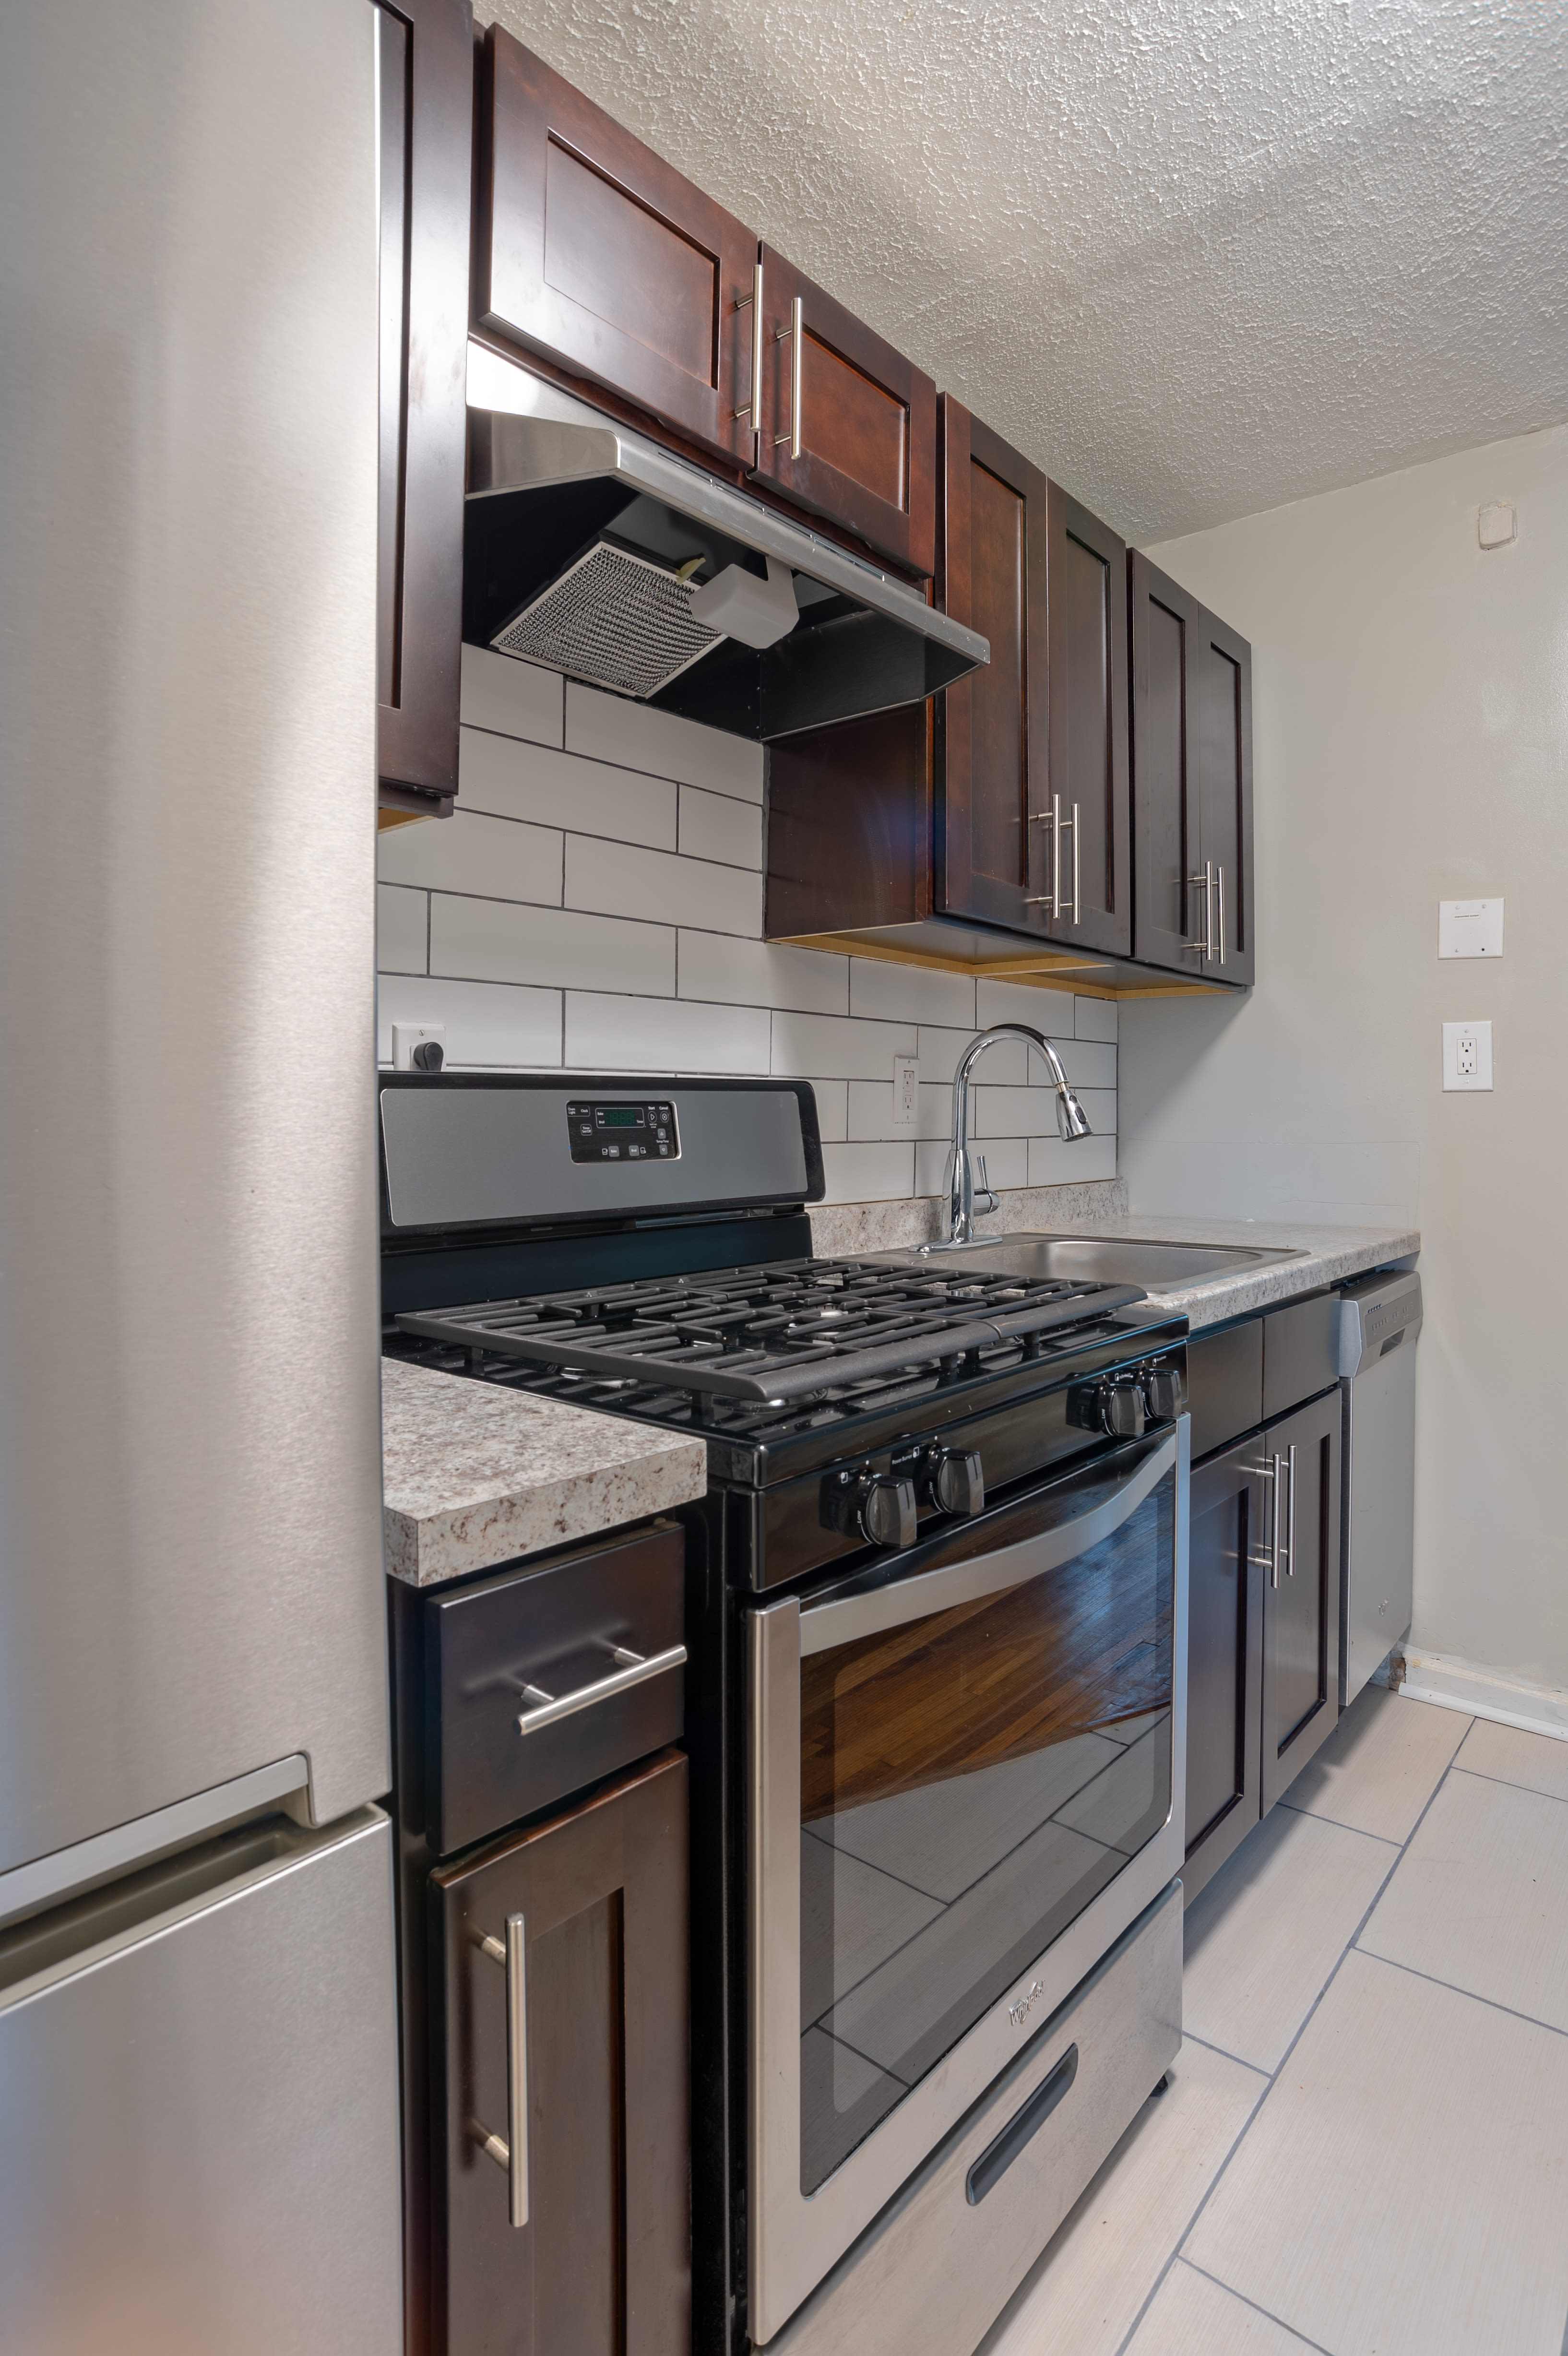 Upgraded kitchen at The Woodlands in Belleville, New Jersey